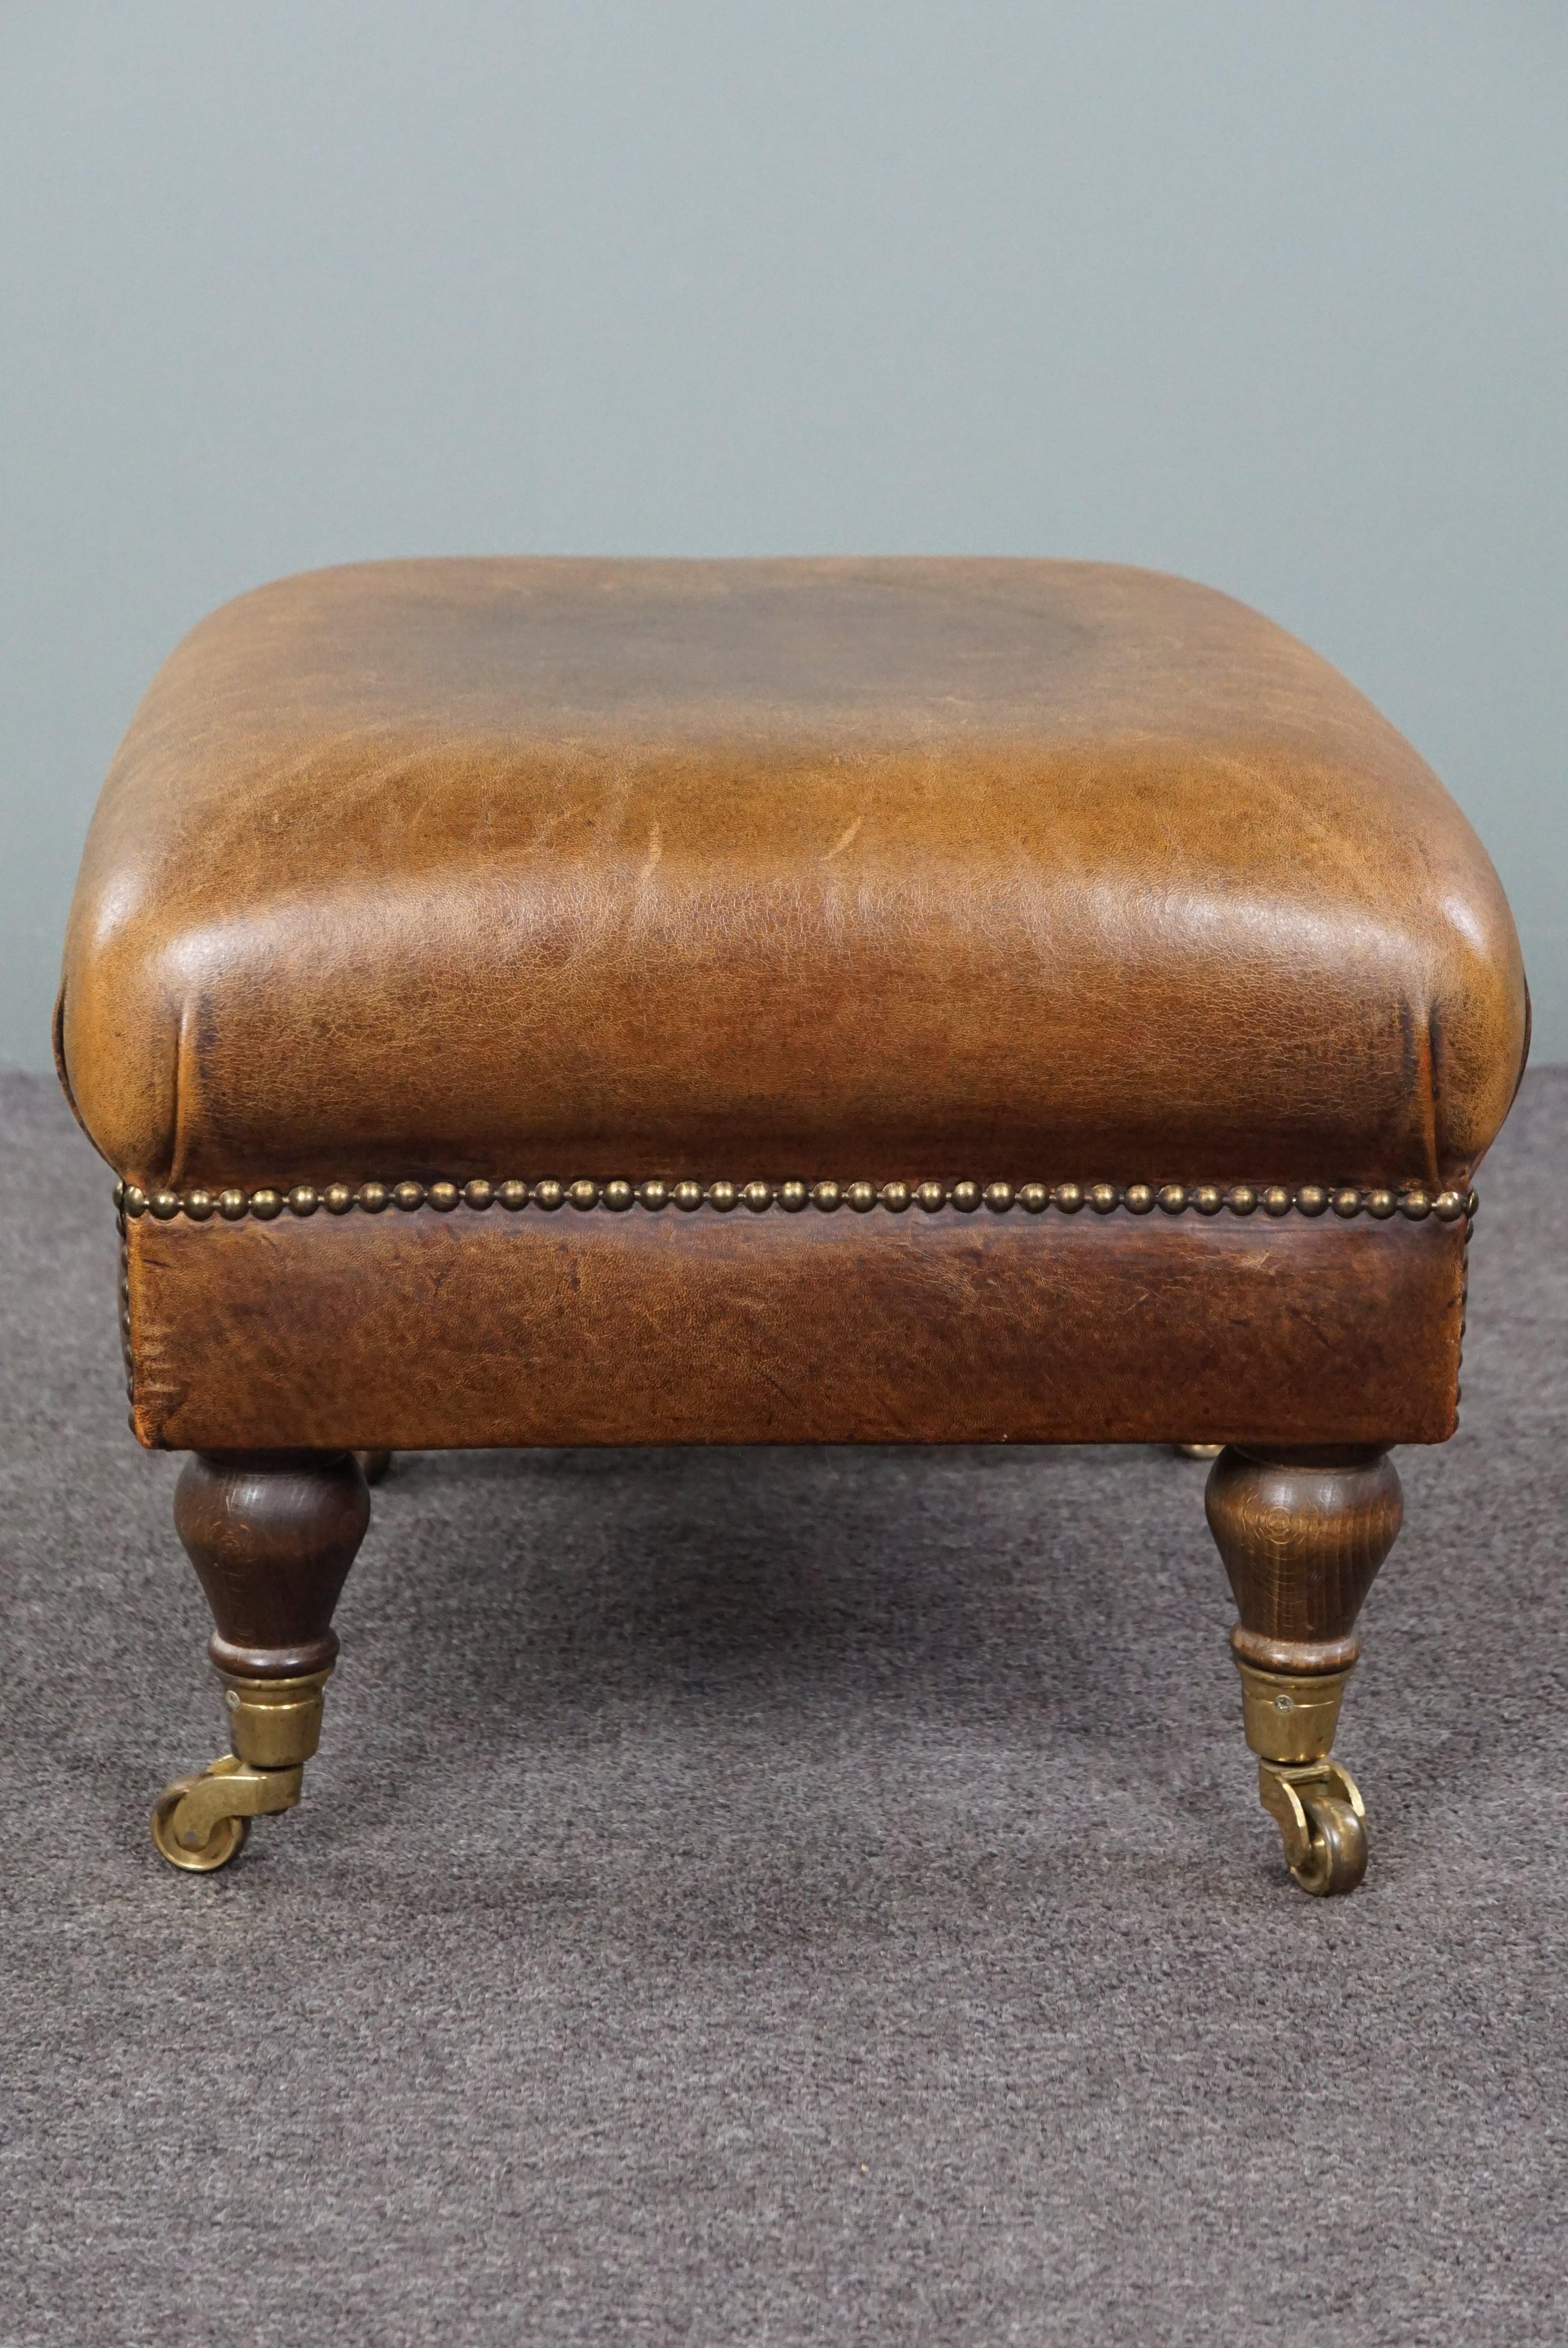 Leather Charming sheep leather ottoman with elegant legs and wheels